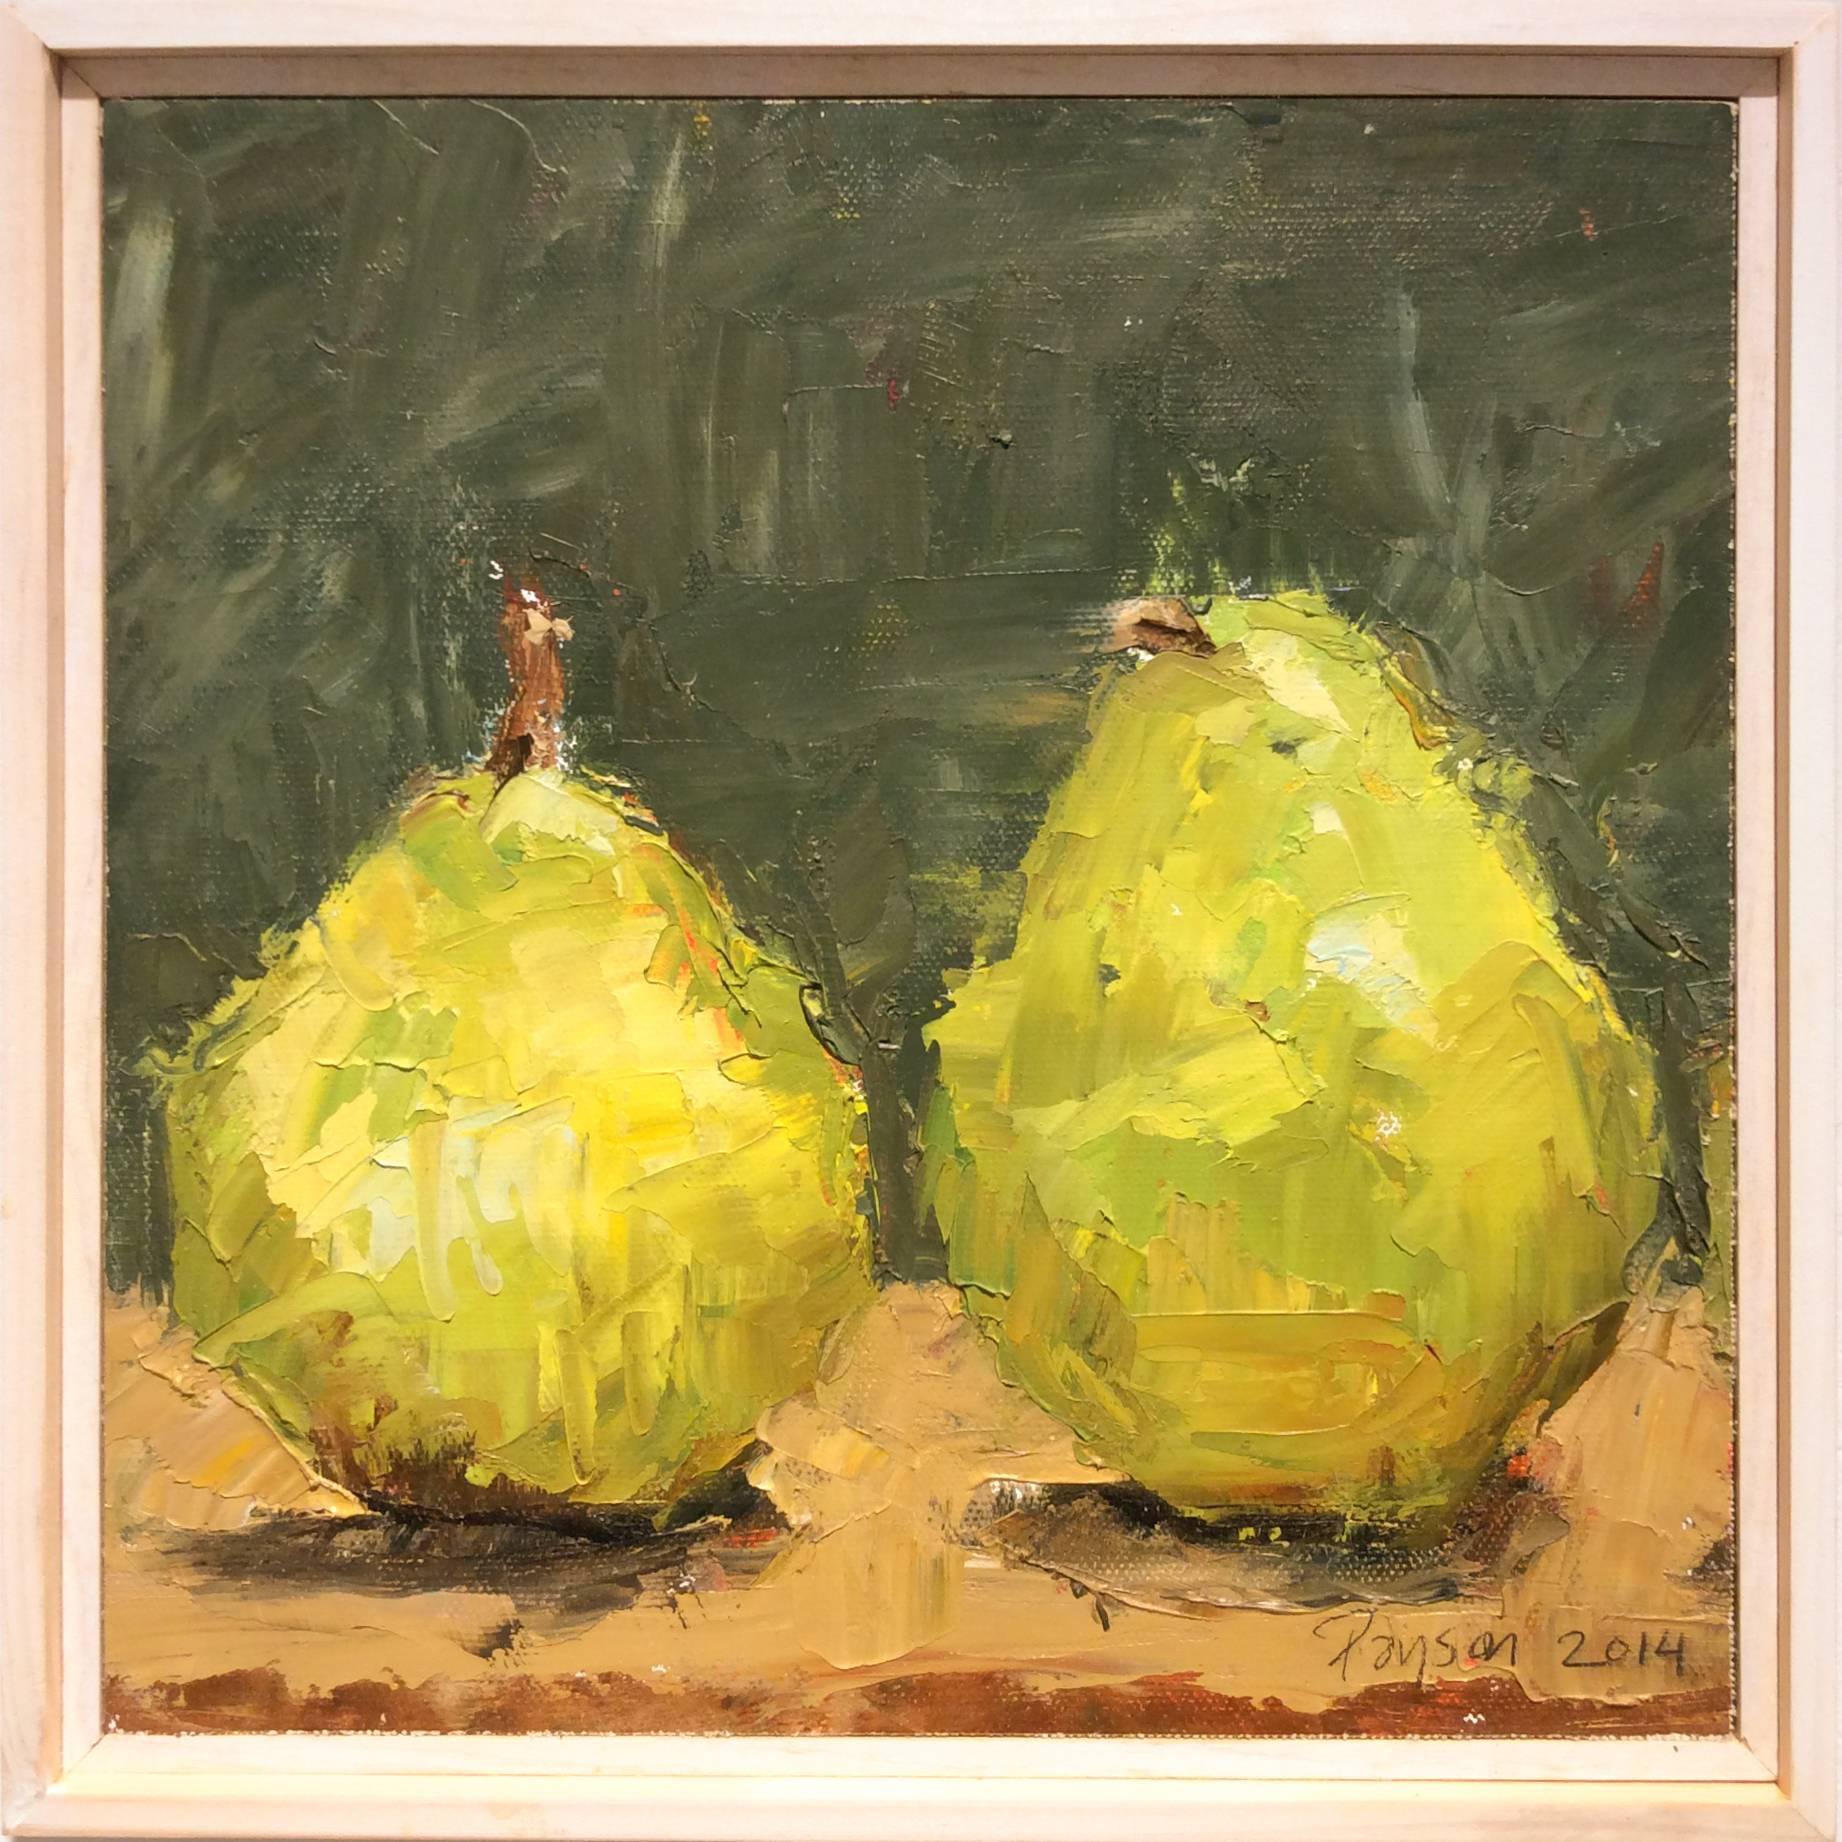 Contemporary impressionist impressionistic framed oil painting pears fruit still life signed vibrant bright yellow blue